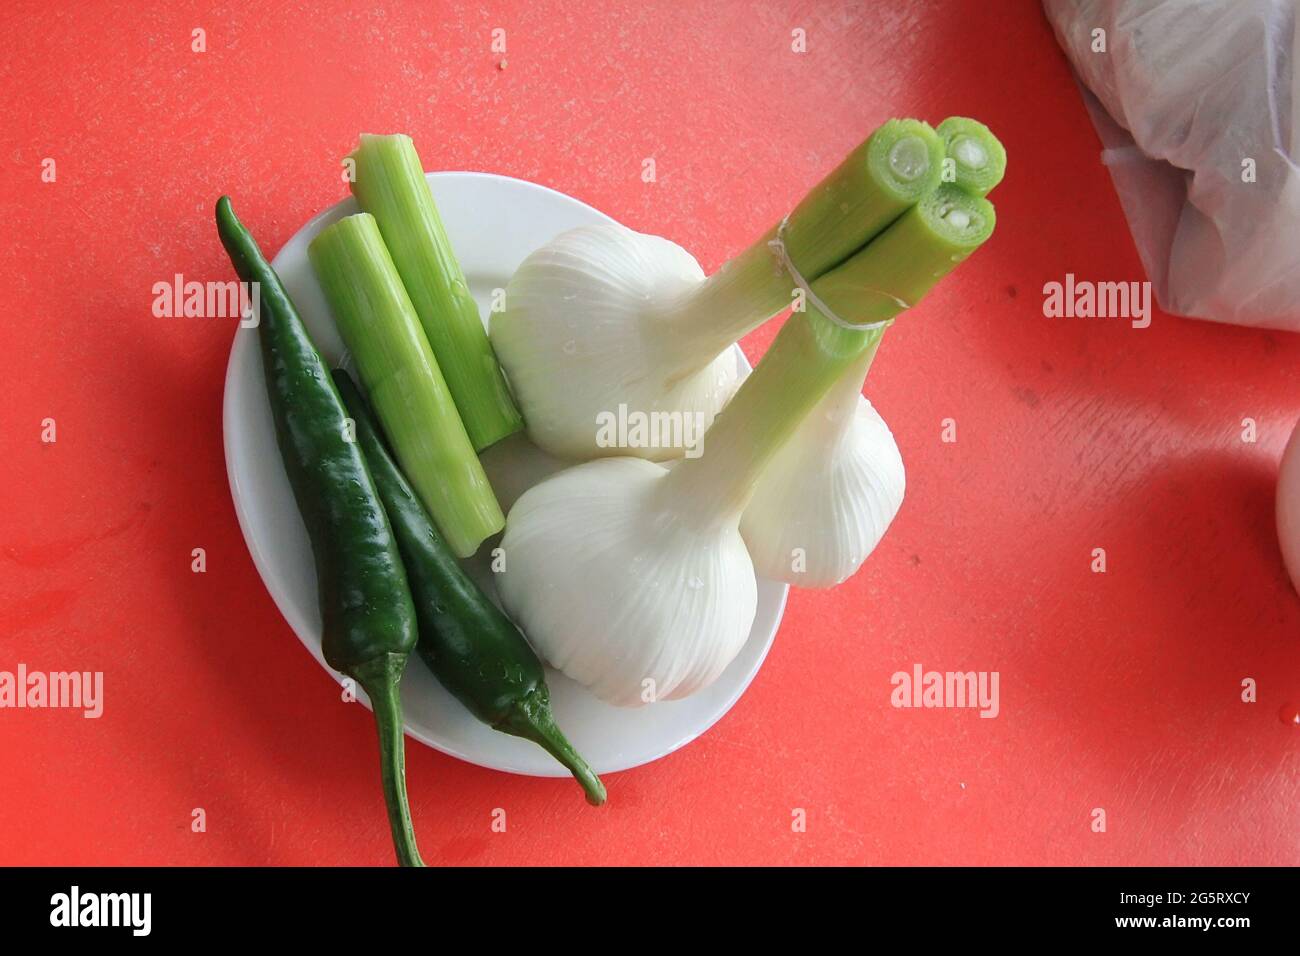 Three heads of young garlic and two green chili peppers in a white plate on a red table Stock Photo